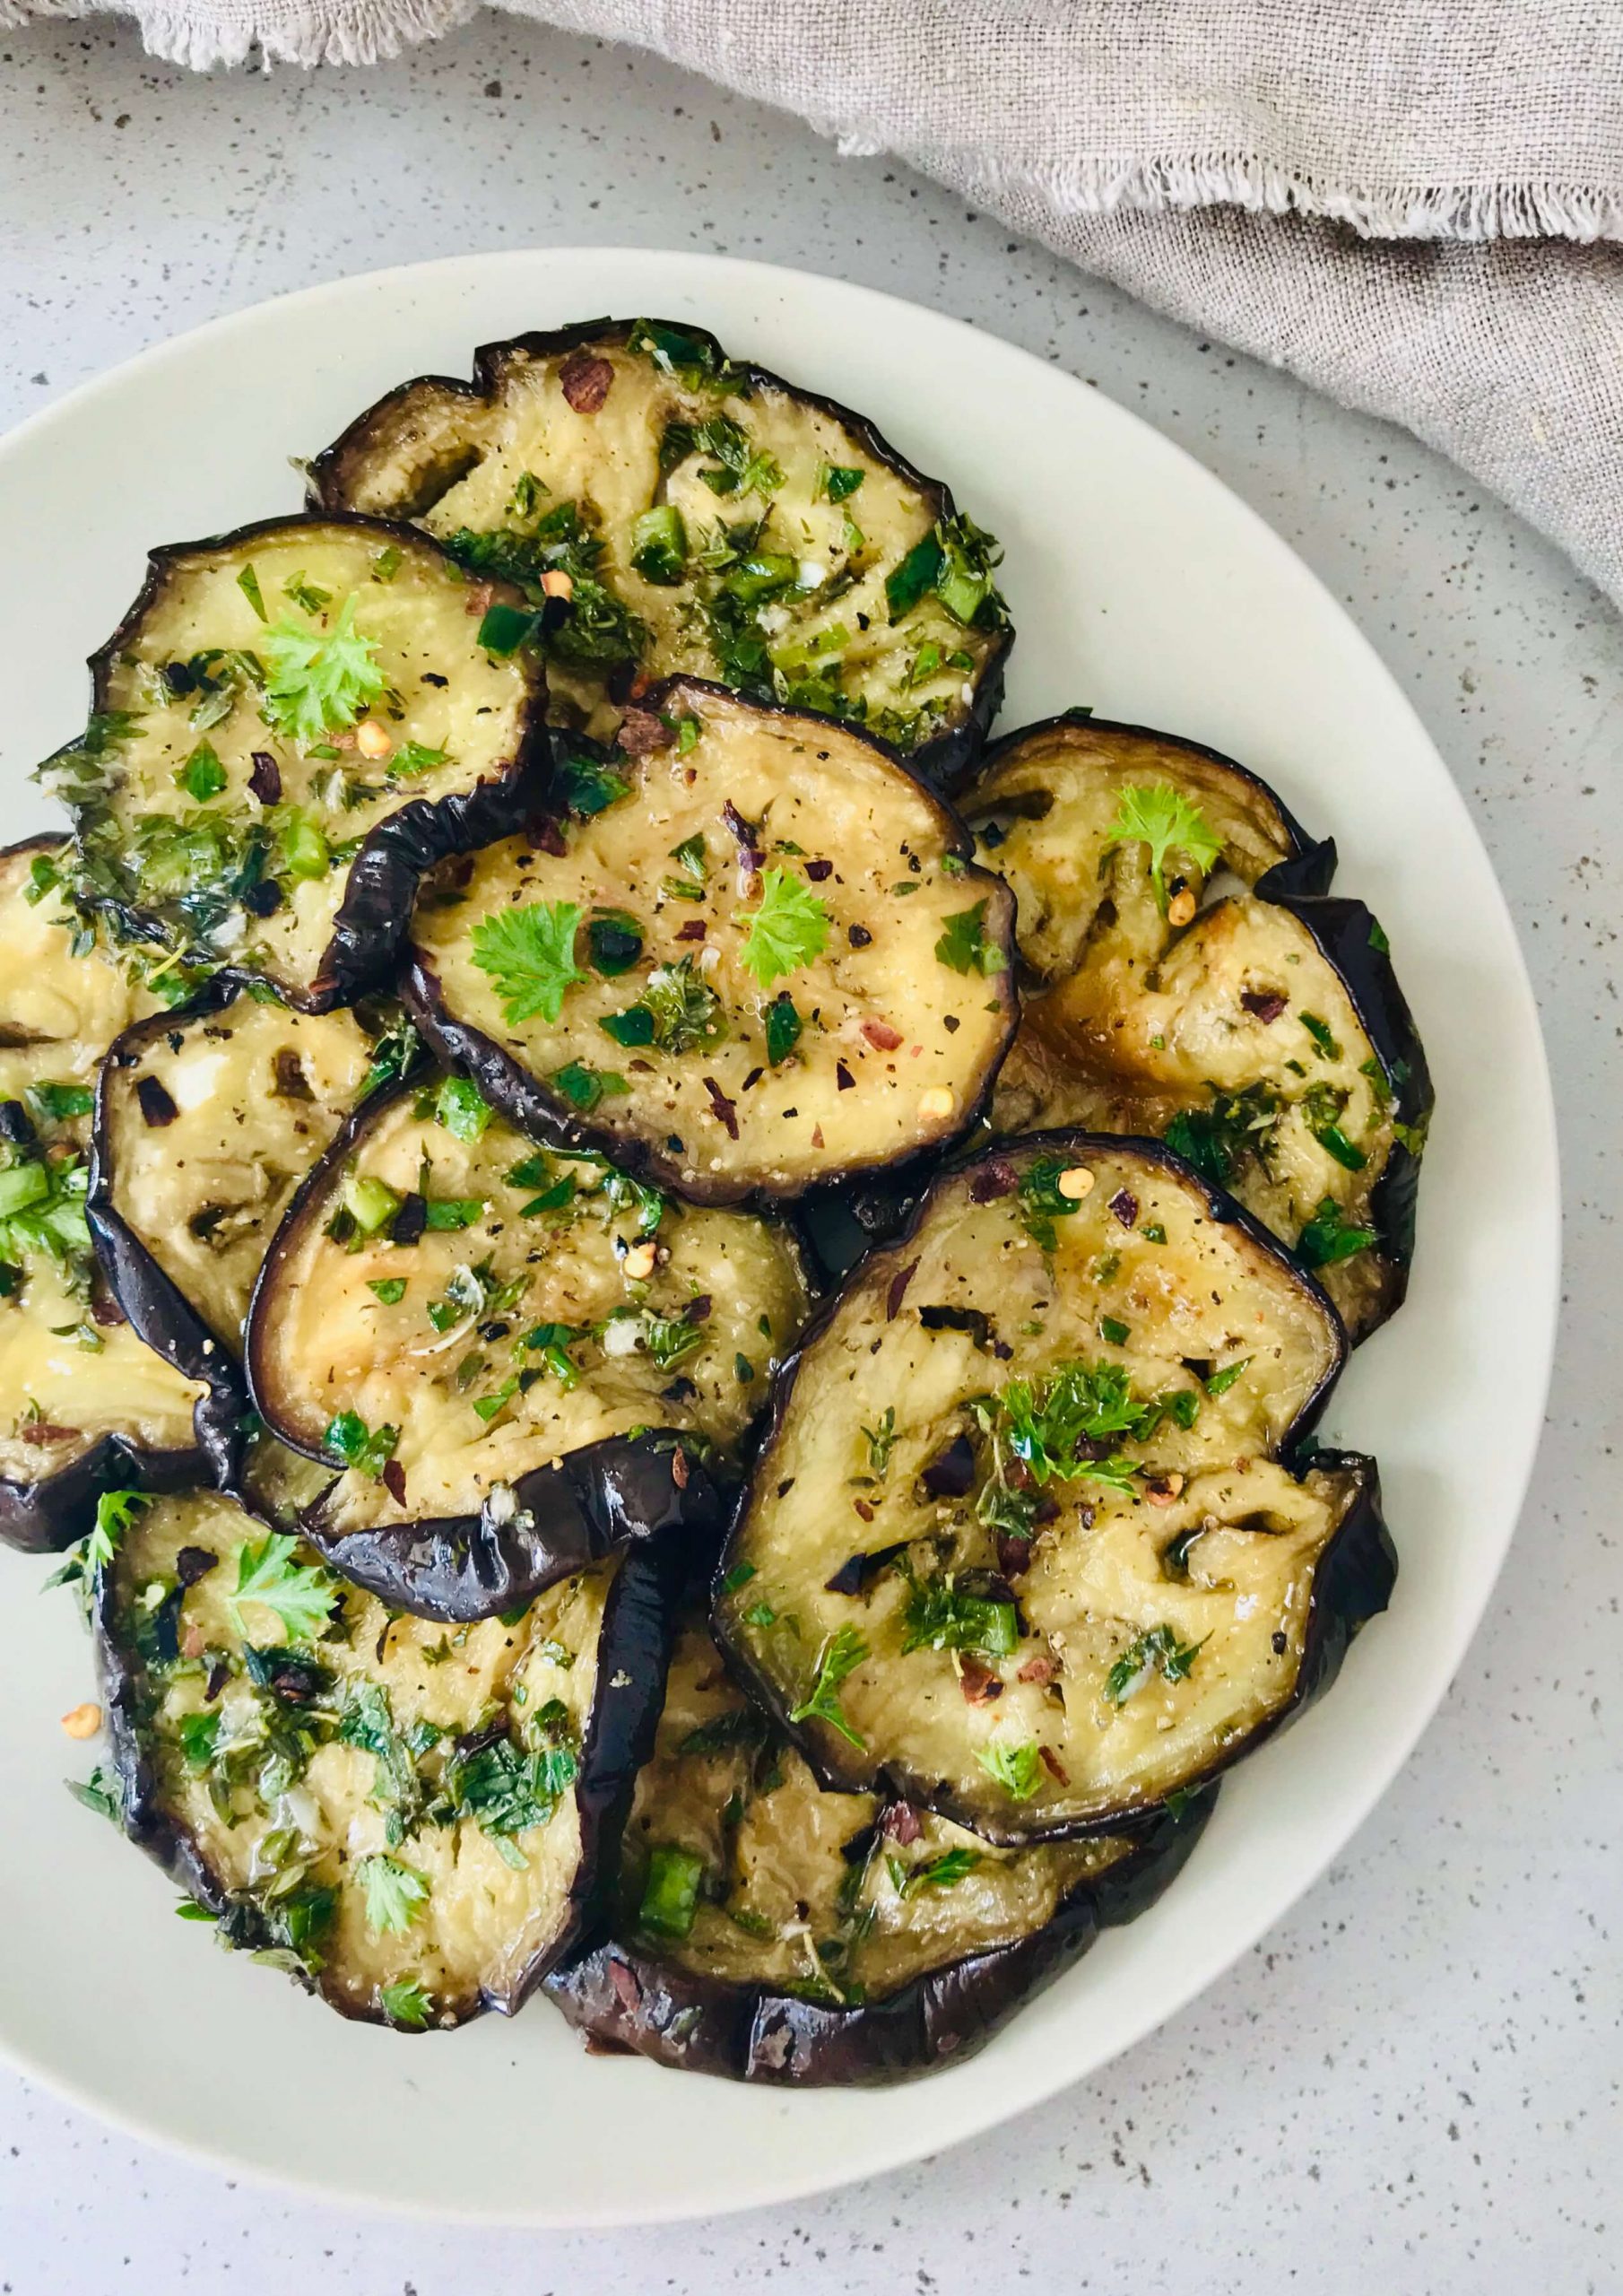 Marinated Roasted Eggplant | Easy Read Recipes by Leanne Foreman